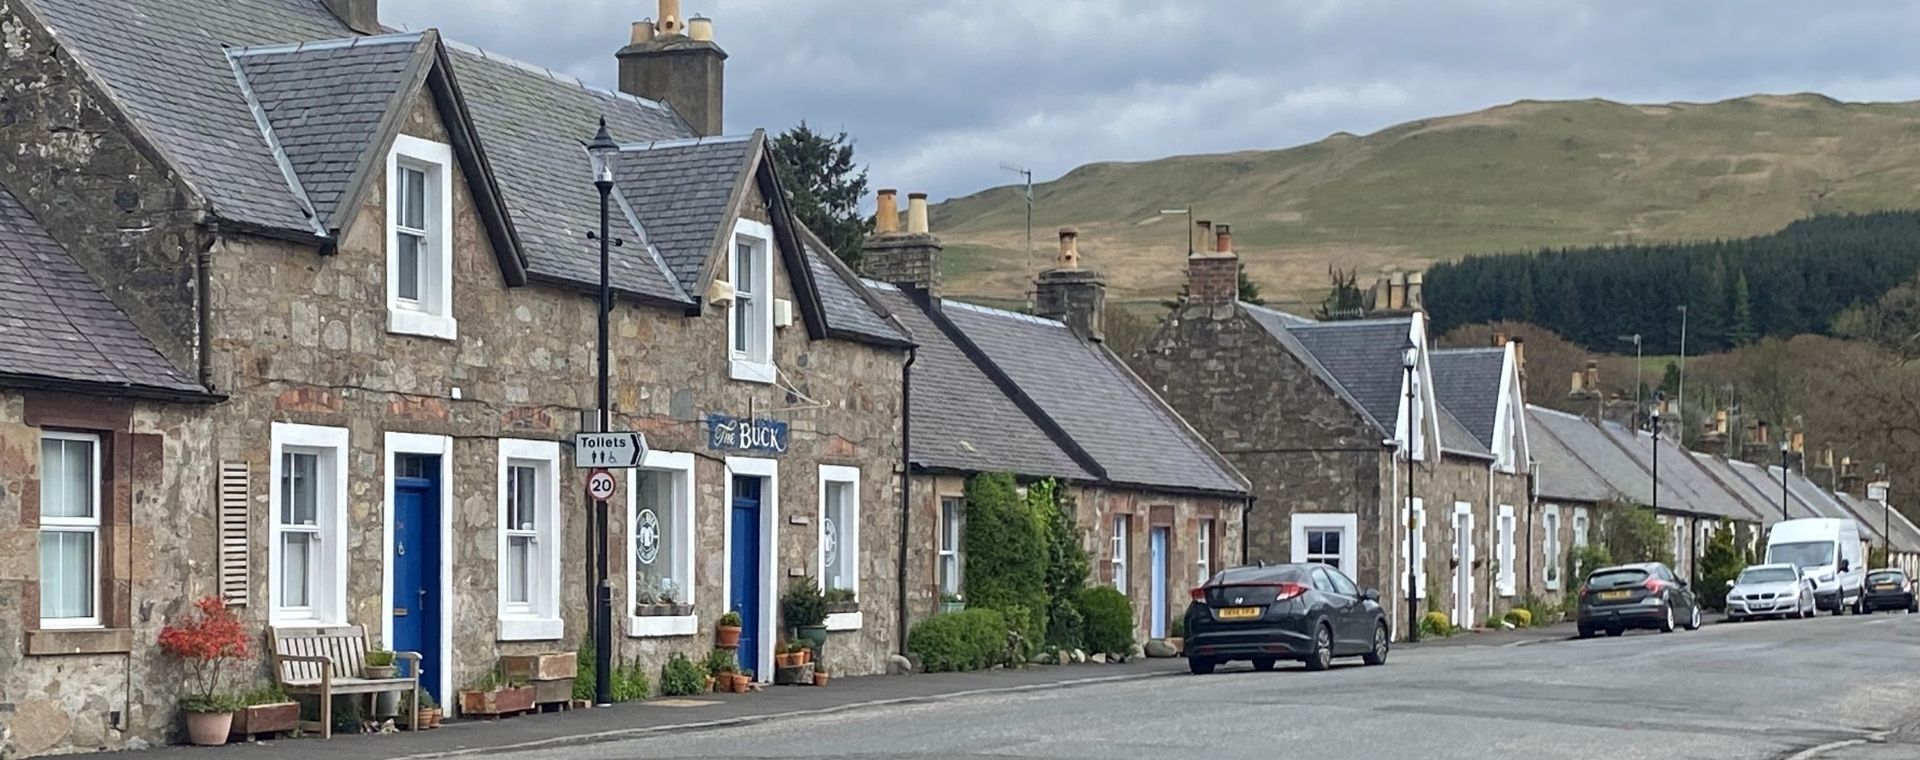 Row of stone cottages in Straiton village.